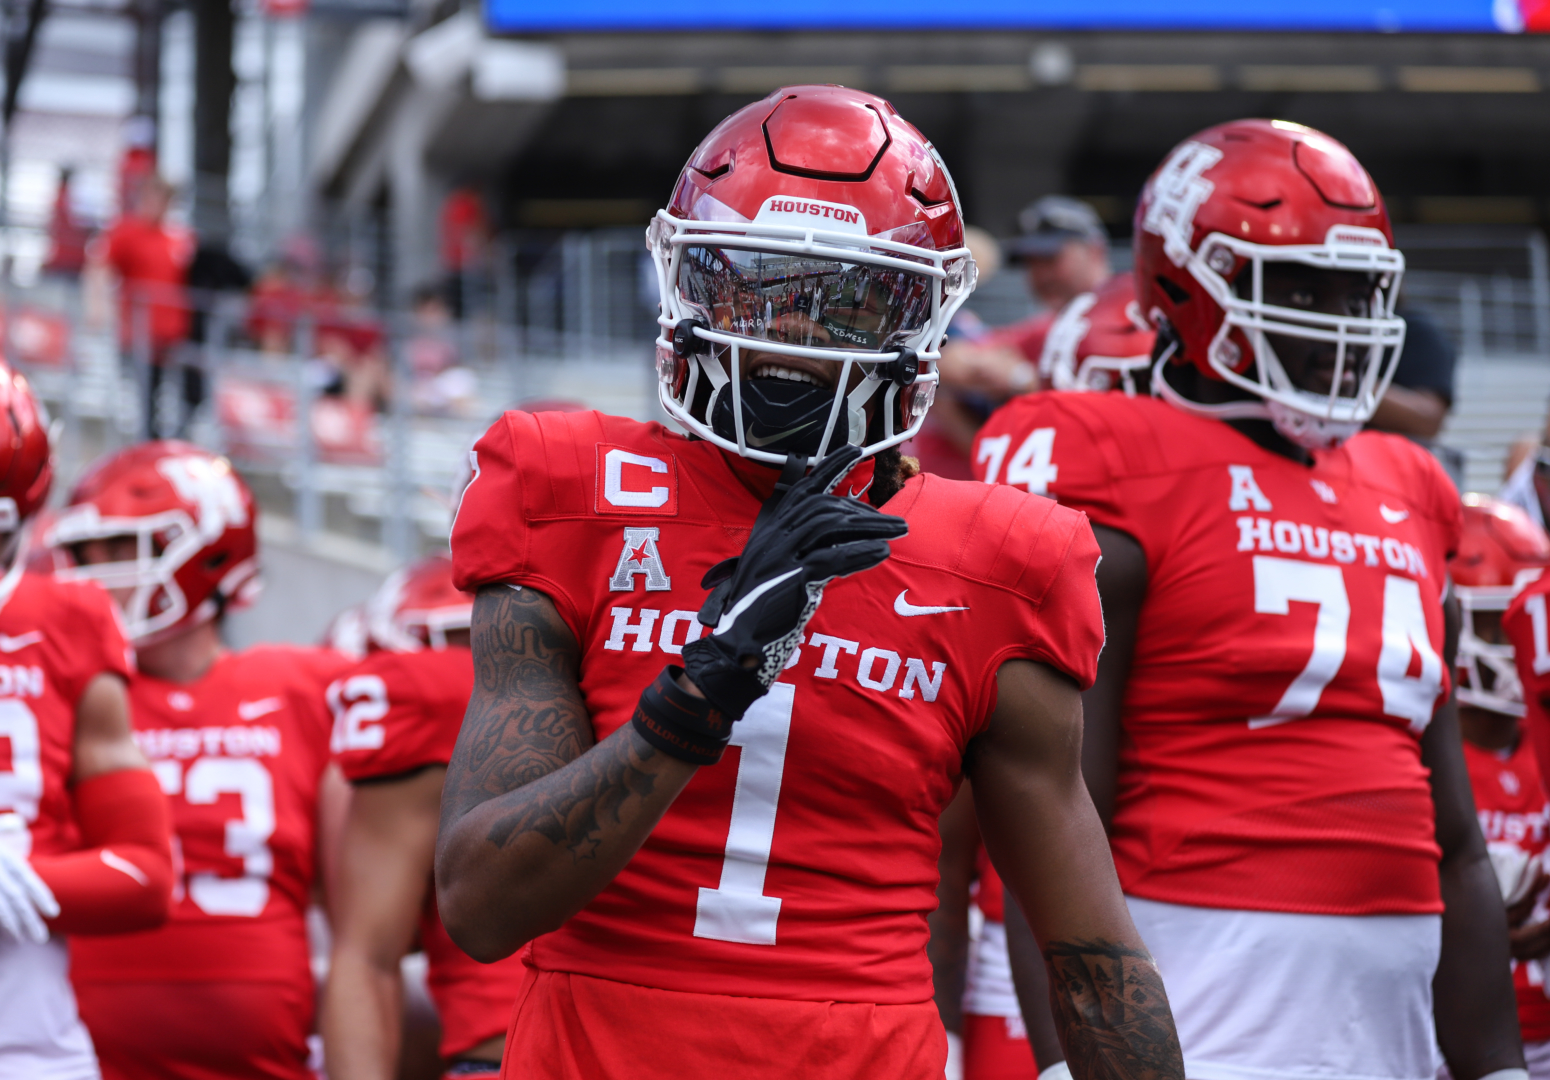 UH junior wide receiver Nathaniel Dell has hauled in 18 receptions for 246 yards and two touchdowns through the Cougars' first three games. | Sean Thomas/The Cougar